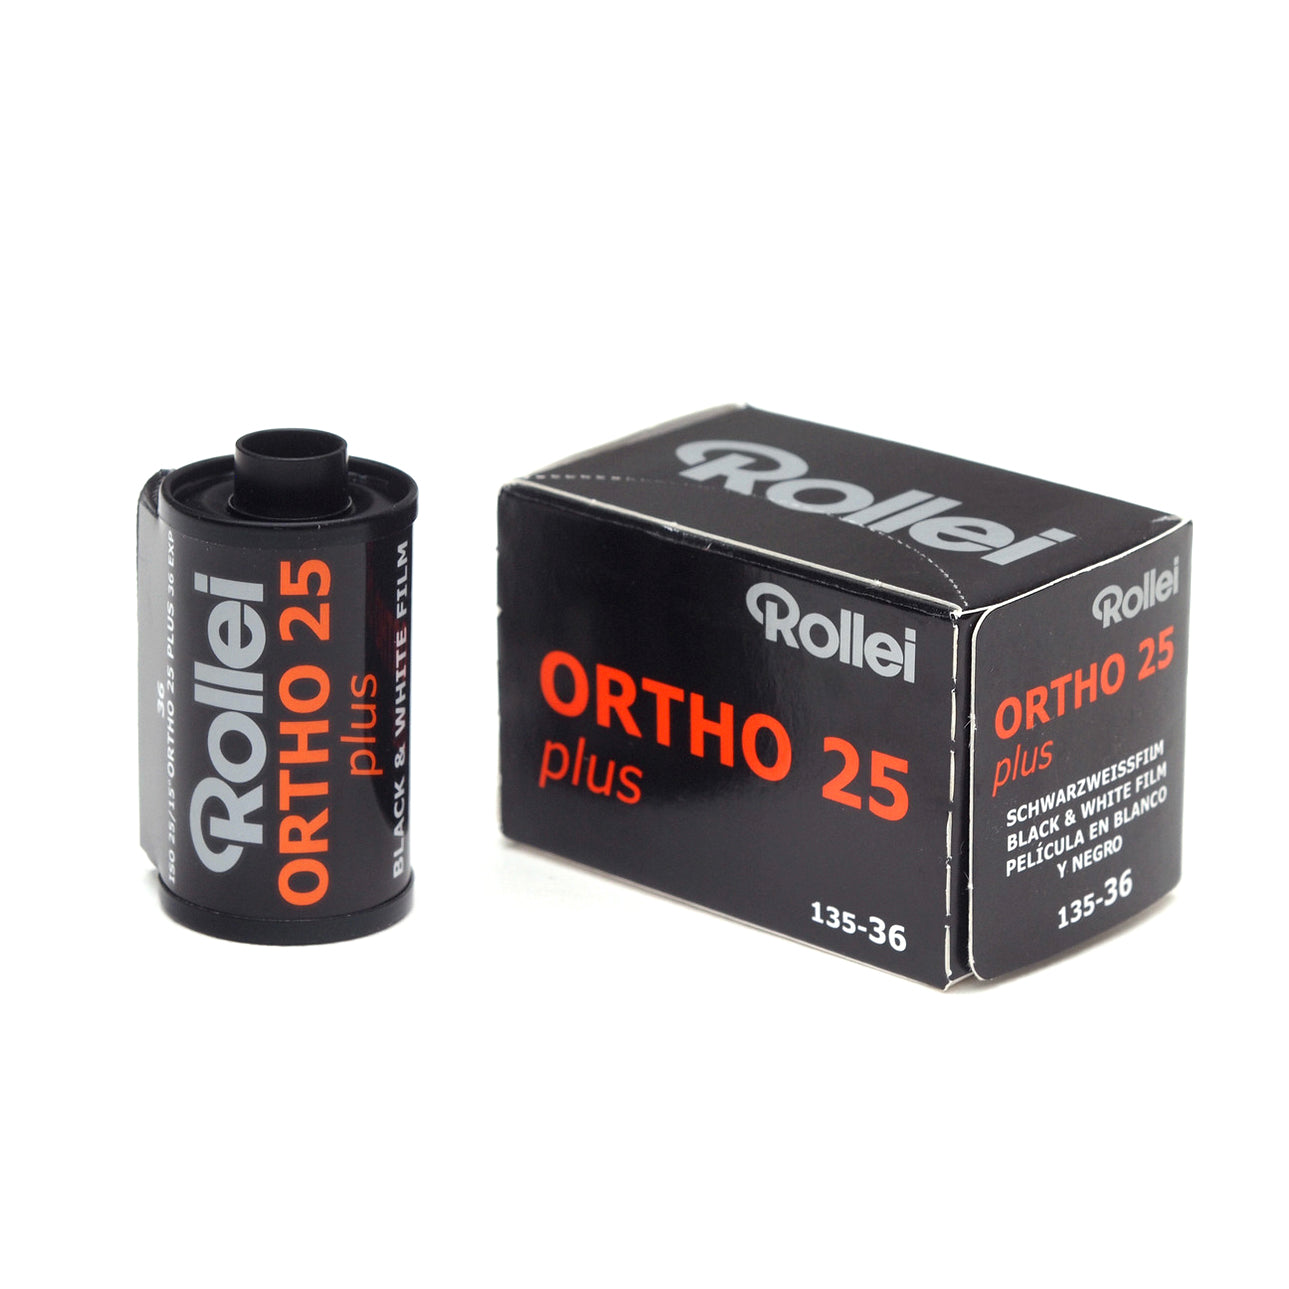 Rollei Ortho 25 Plus 135-36 *Short date*